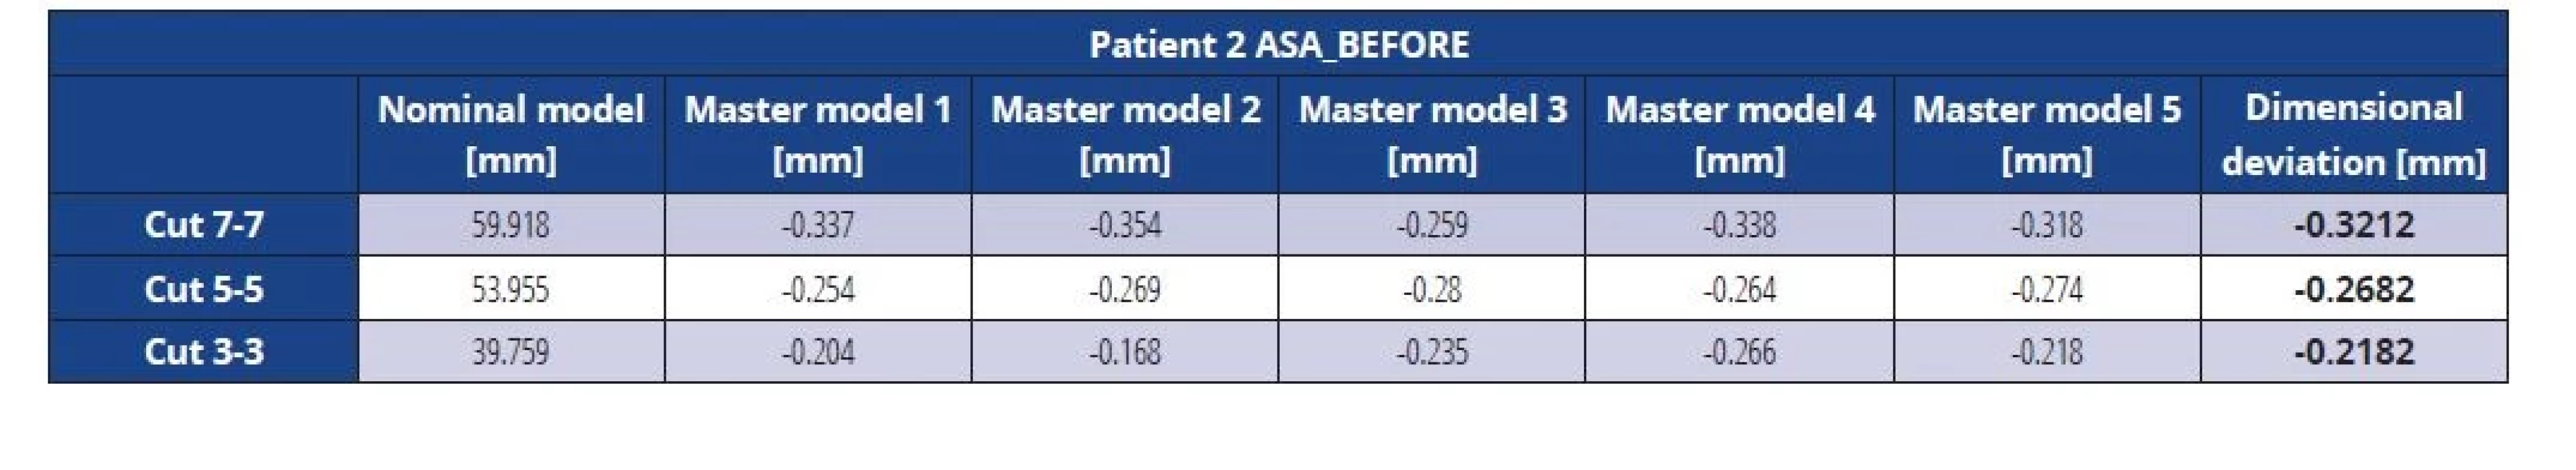 Dimensional deviations of the ASA master model before vacuuming (patient 2)